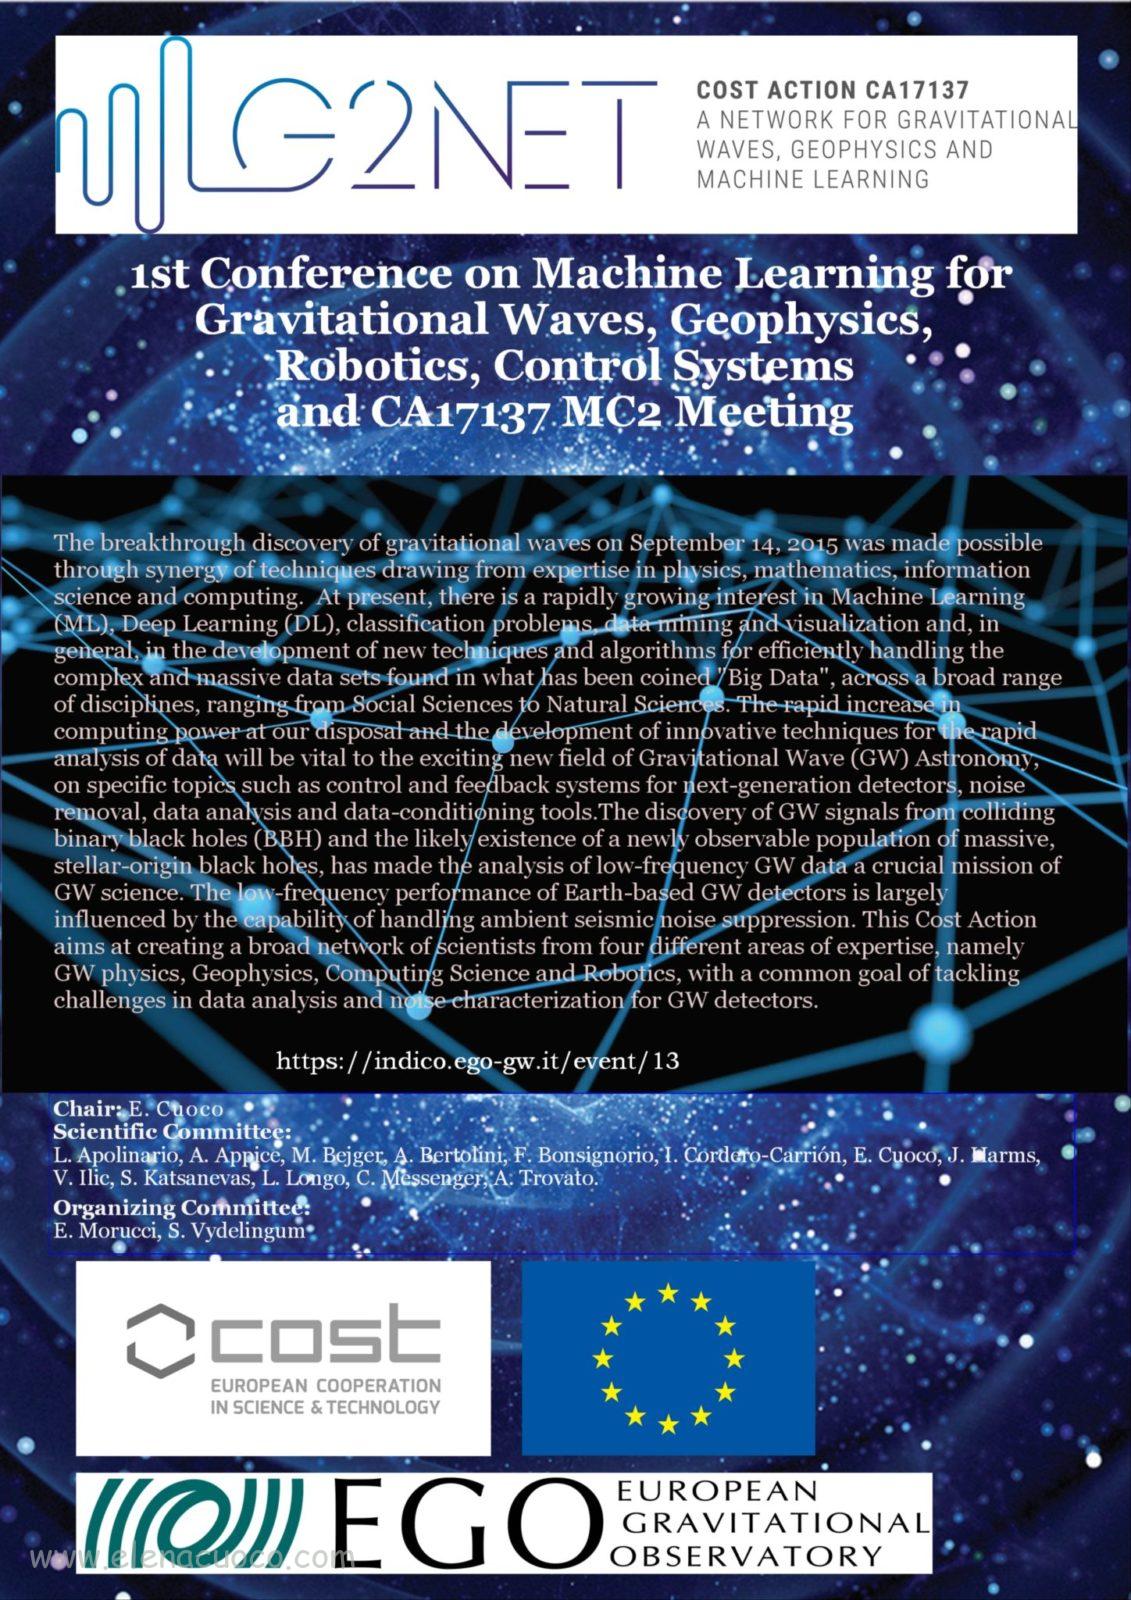 1st Conference on Machine Learning for Gravitational Waves, Geophysics, Robotics, Control System  for CA17137